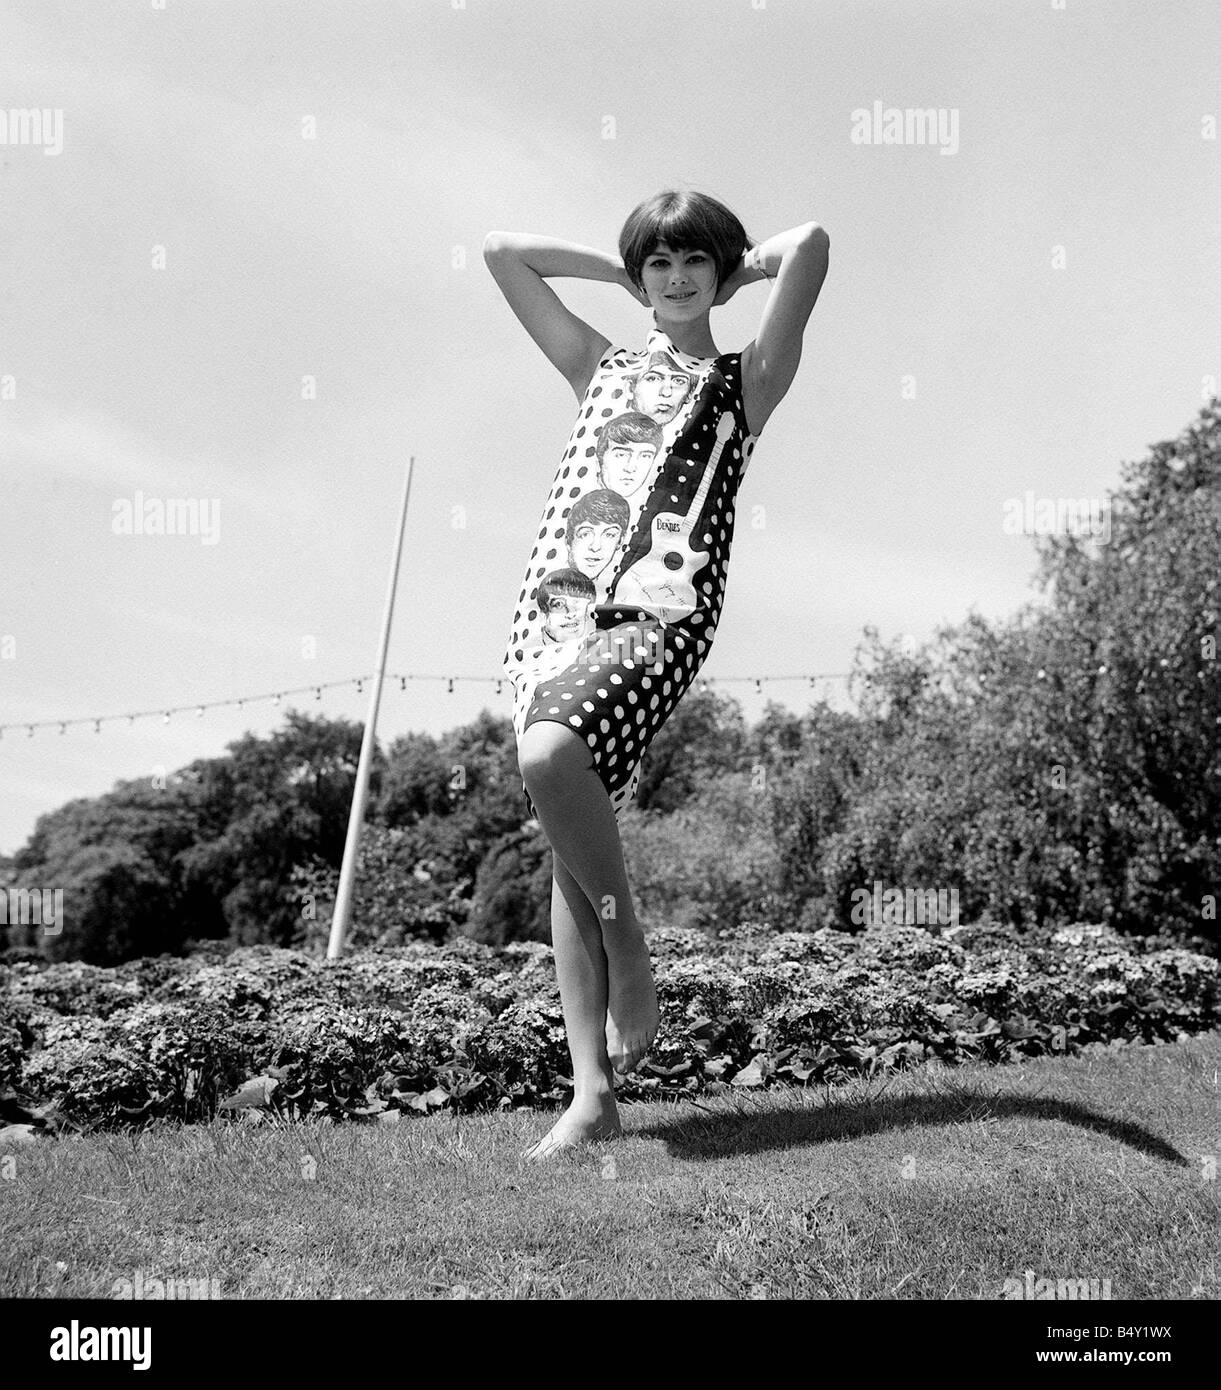 Pop Group The Beatles June 1964 John Lennon Paul McCartney Ringo Starr George Harrison Sandy Hilton modeling a Beatle dress in Battersea Park which will be on sales later this summer in C A modes Stock Photo